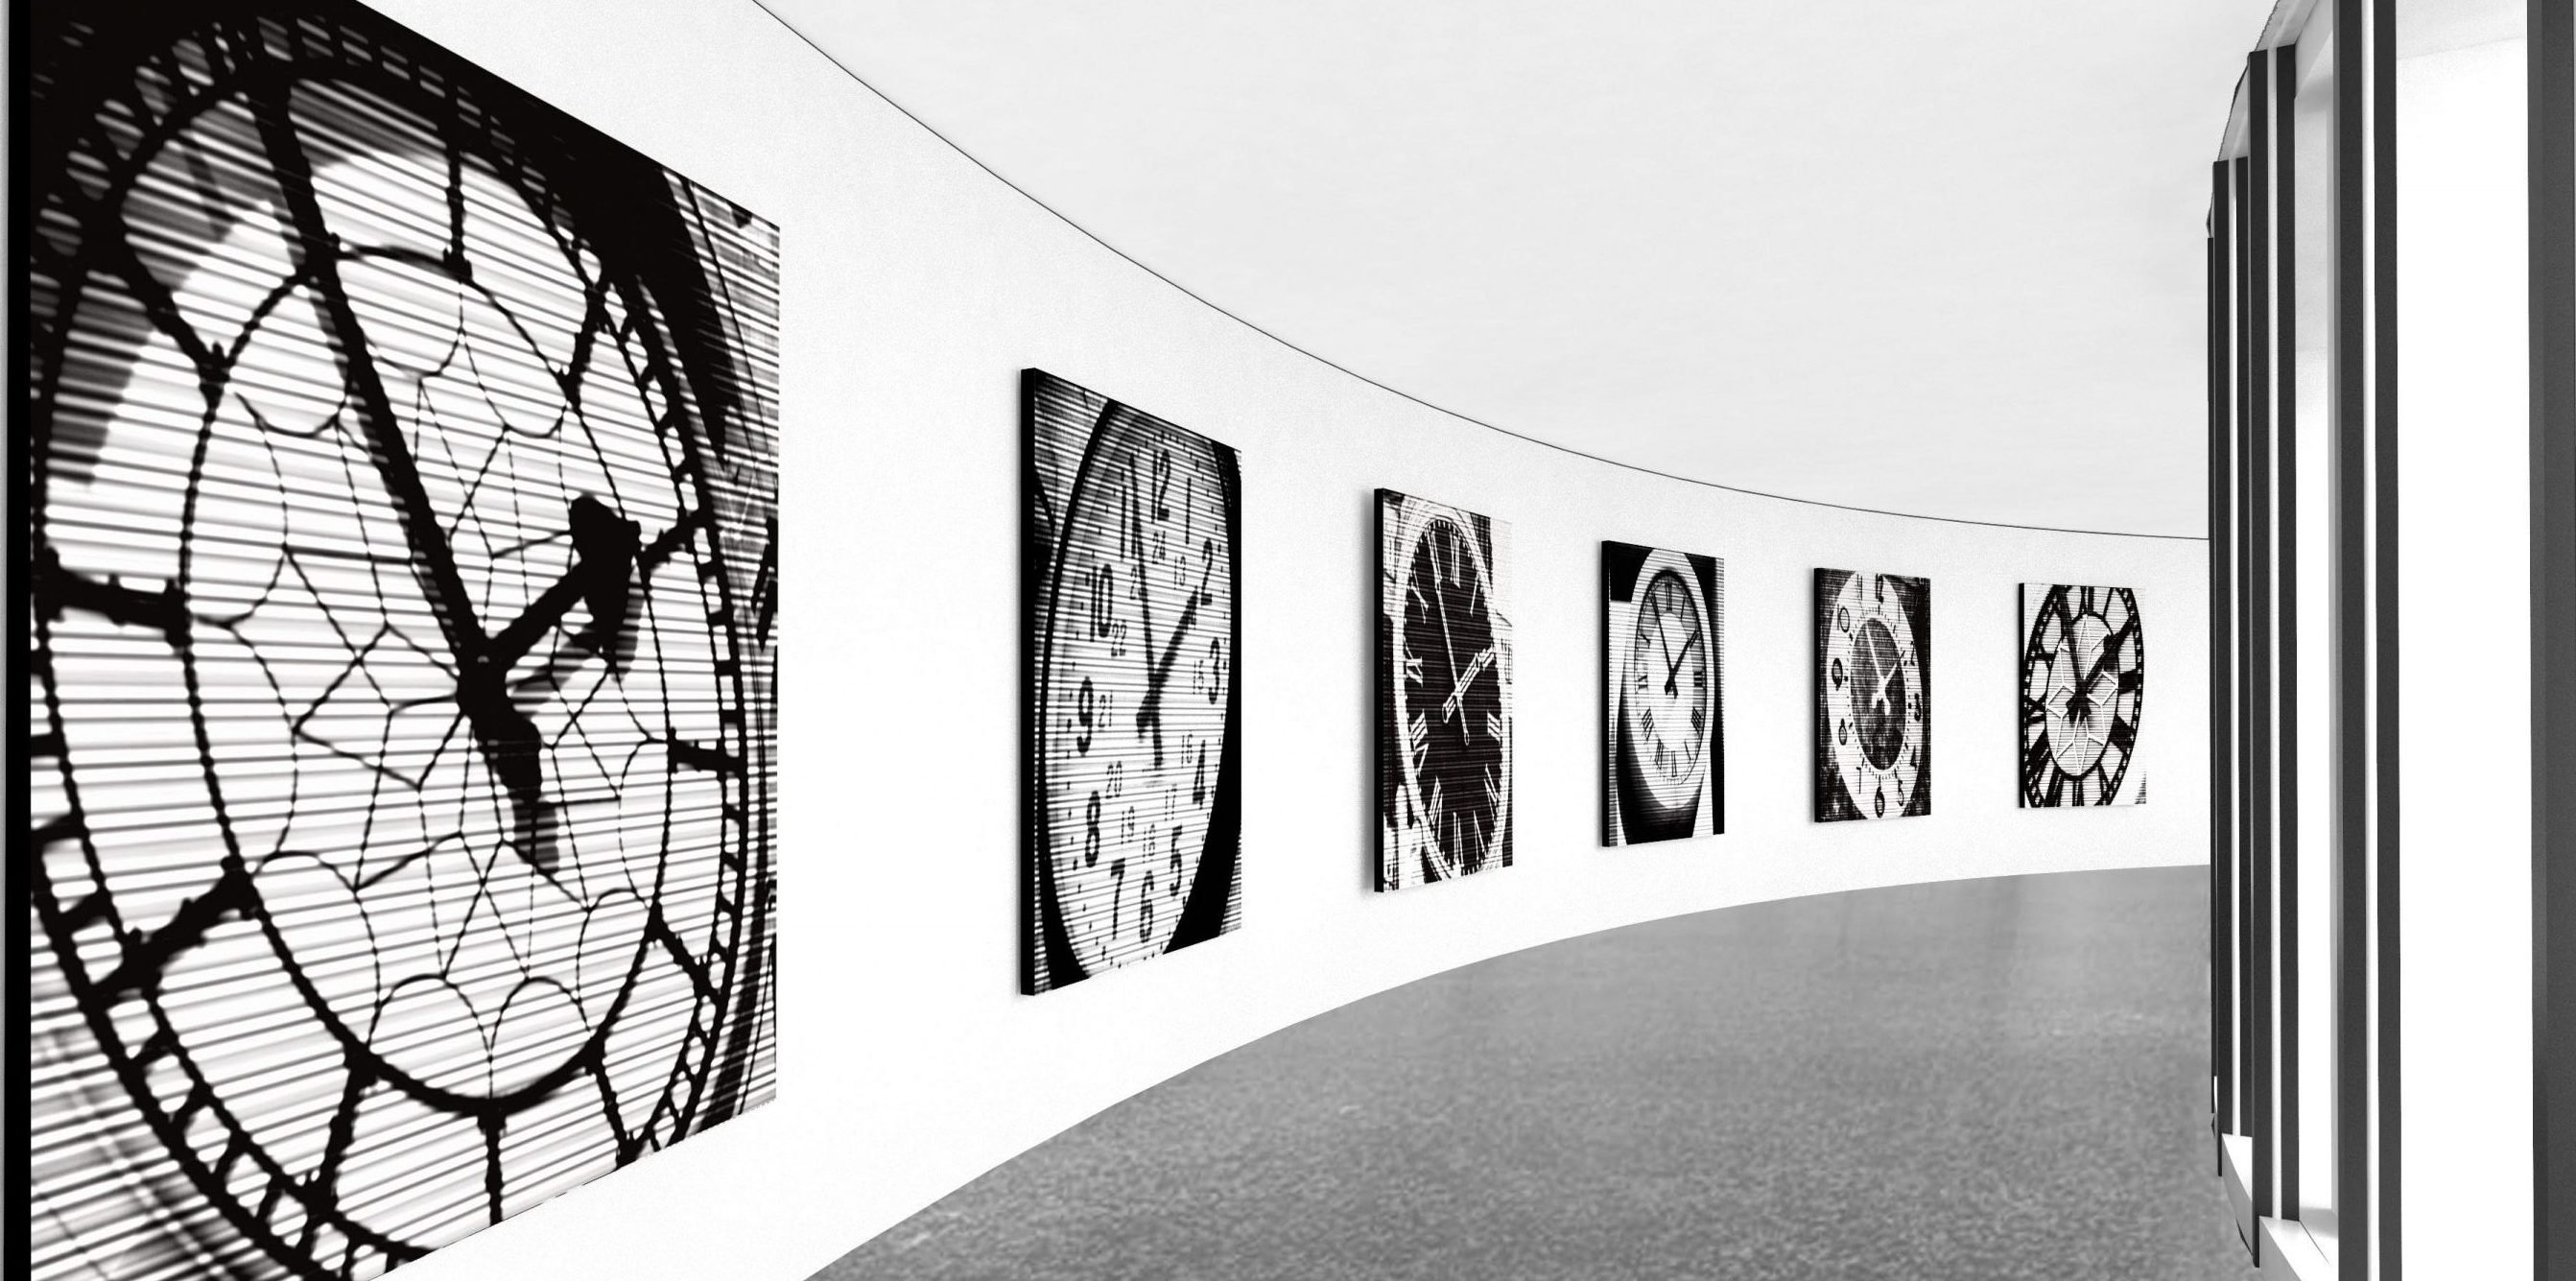 Installation view of "Bettina Pousttchi: World Time Clock." Courtesy of the Hirshhorn Museum and Sculpture Garden.